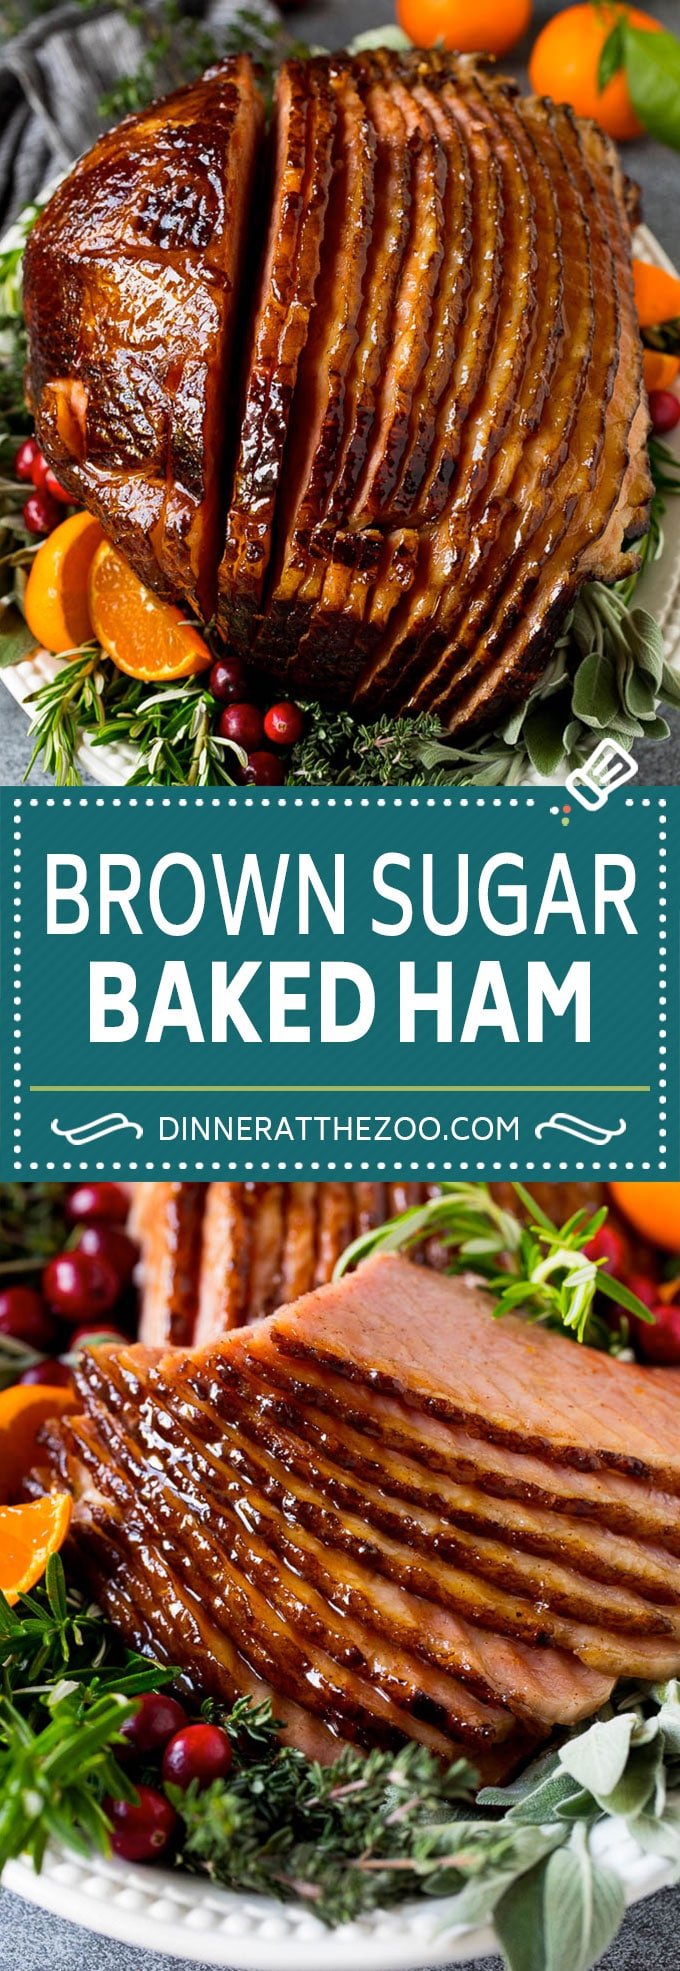 This baked ham is coated in a homemade brown sugar glaze, then cooked until golden brown and caramelized.